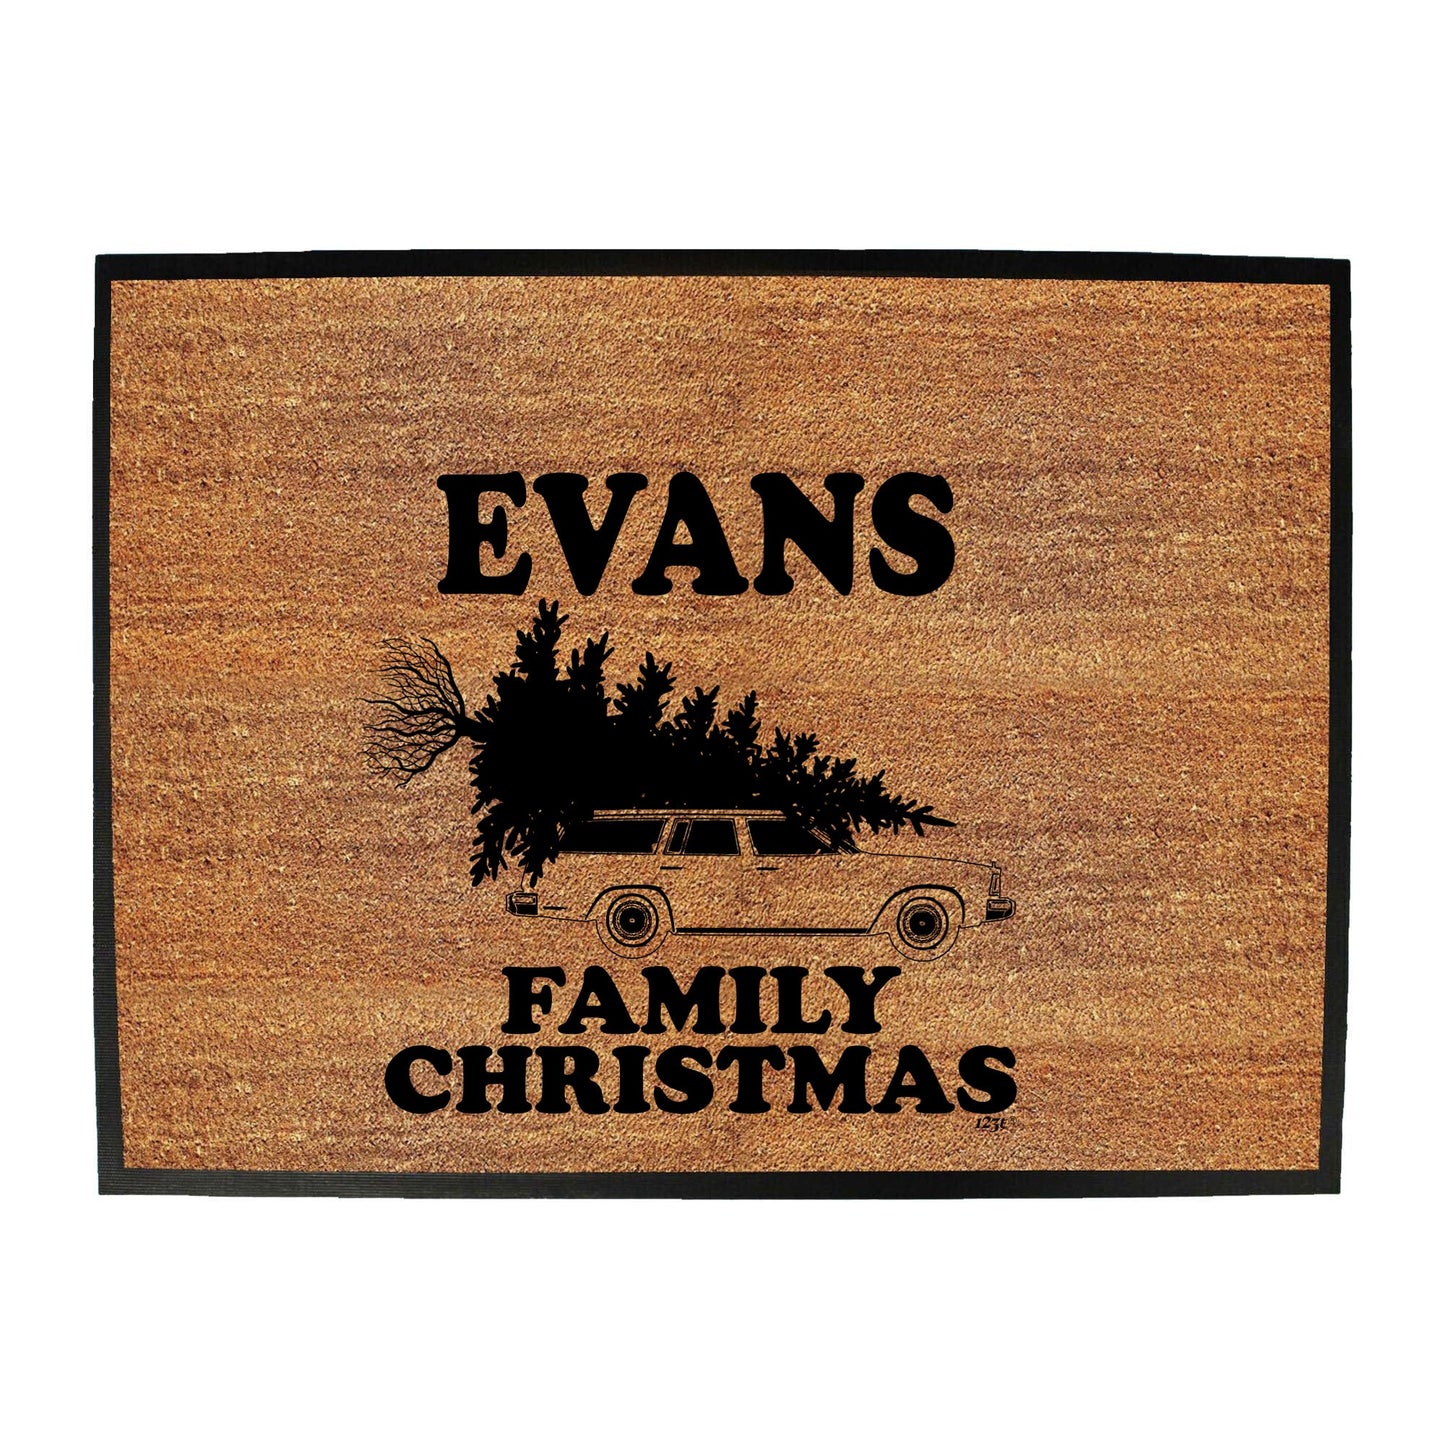 Family Christmas Evans - Funny Novelty Doormat